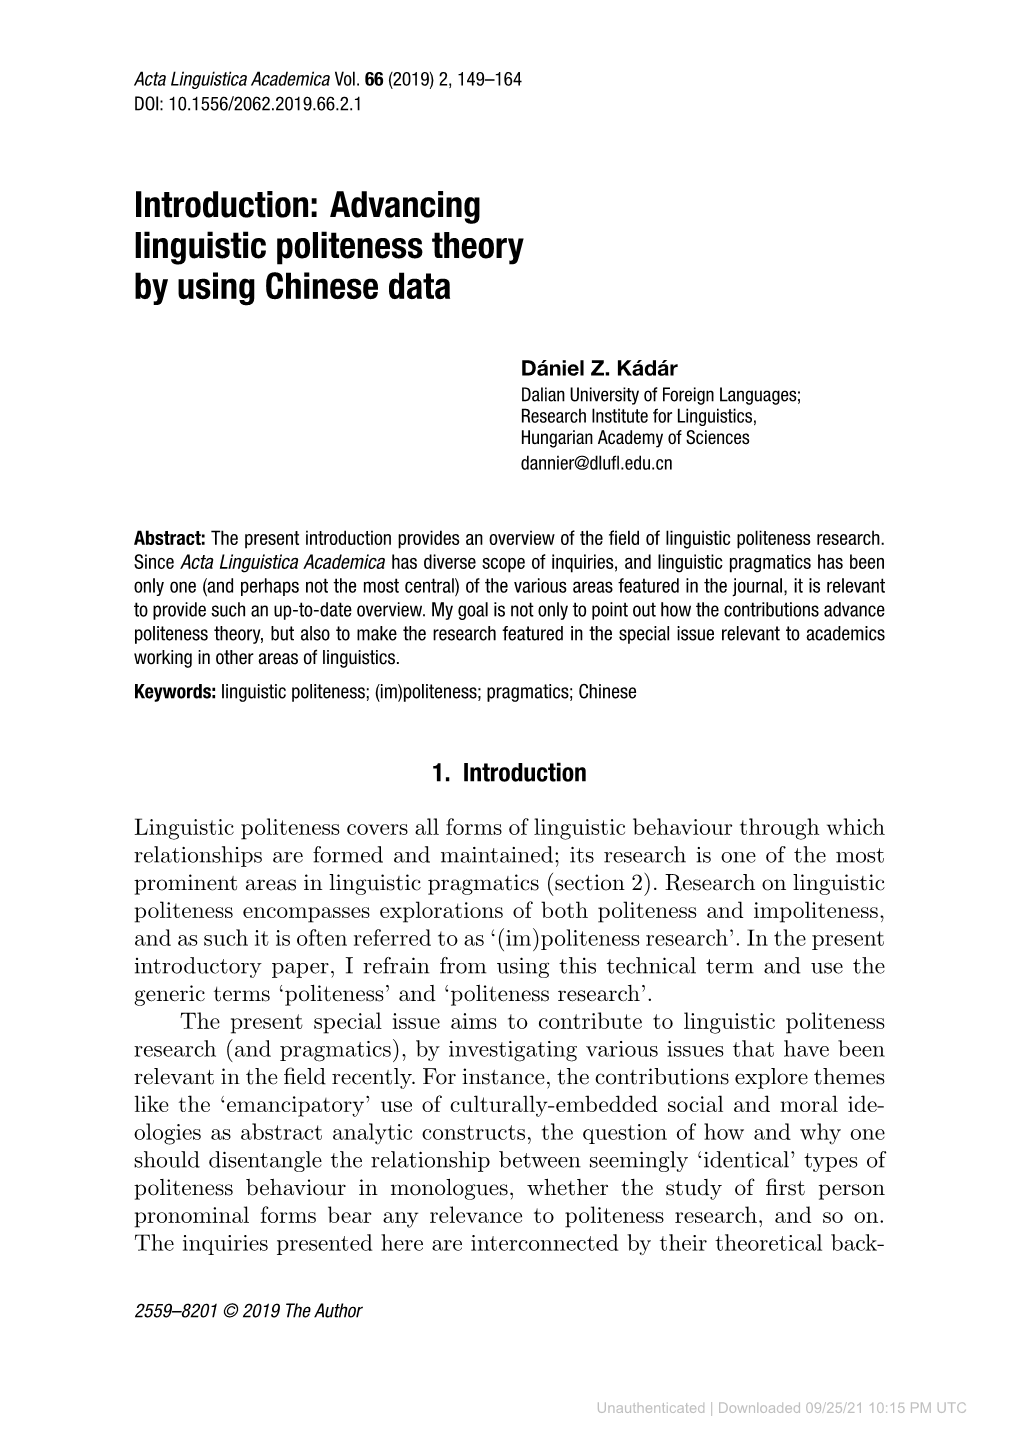 Introduction: Advancing Linguistic Politeness Theory by Using Chinese Data